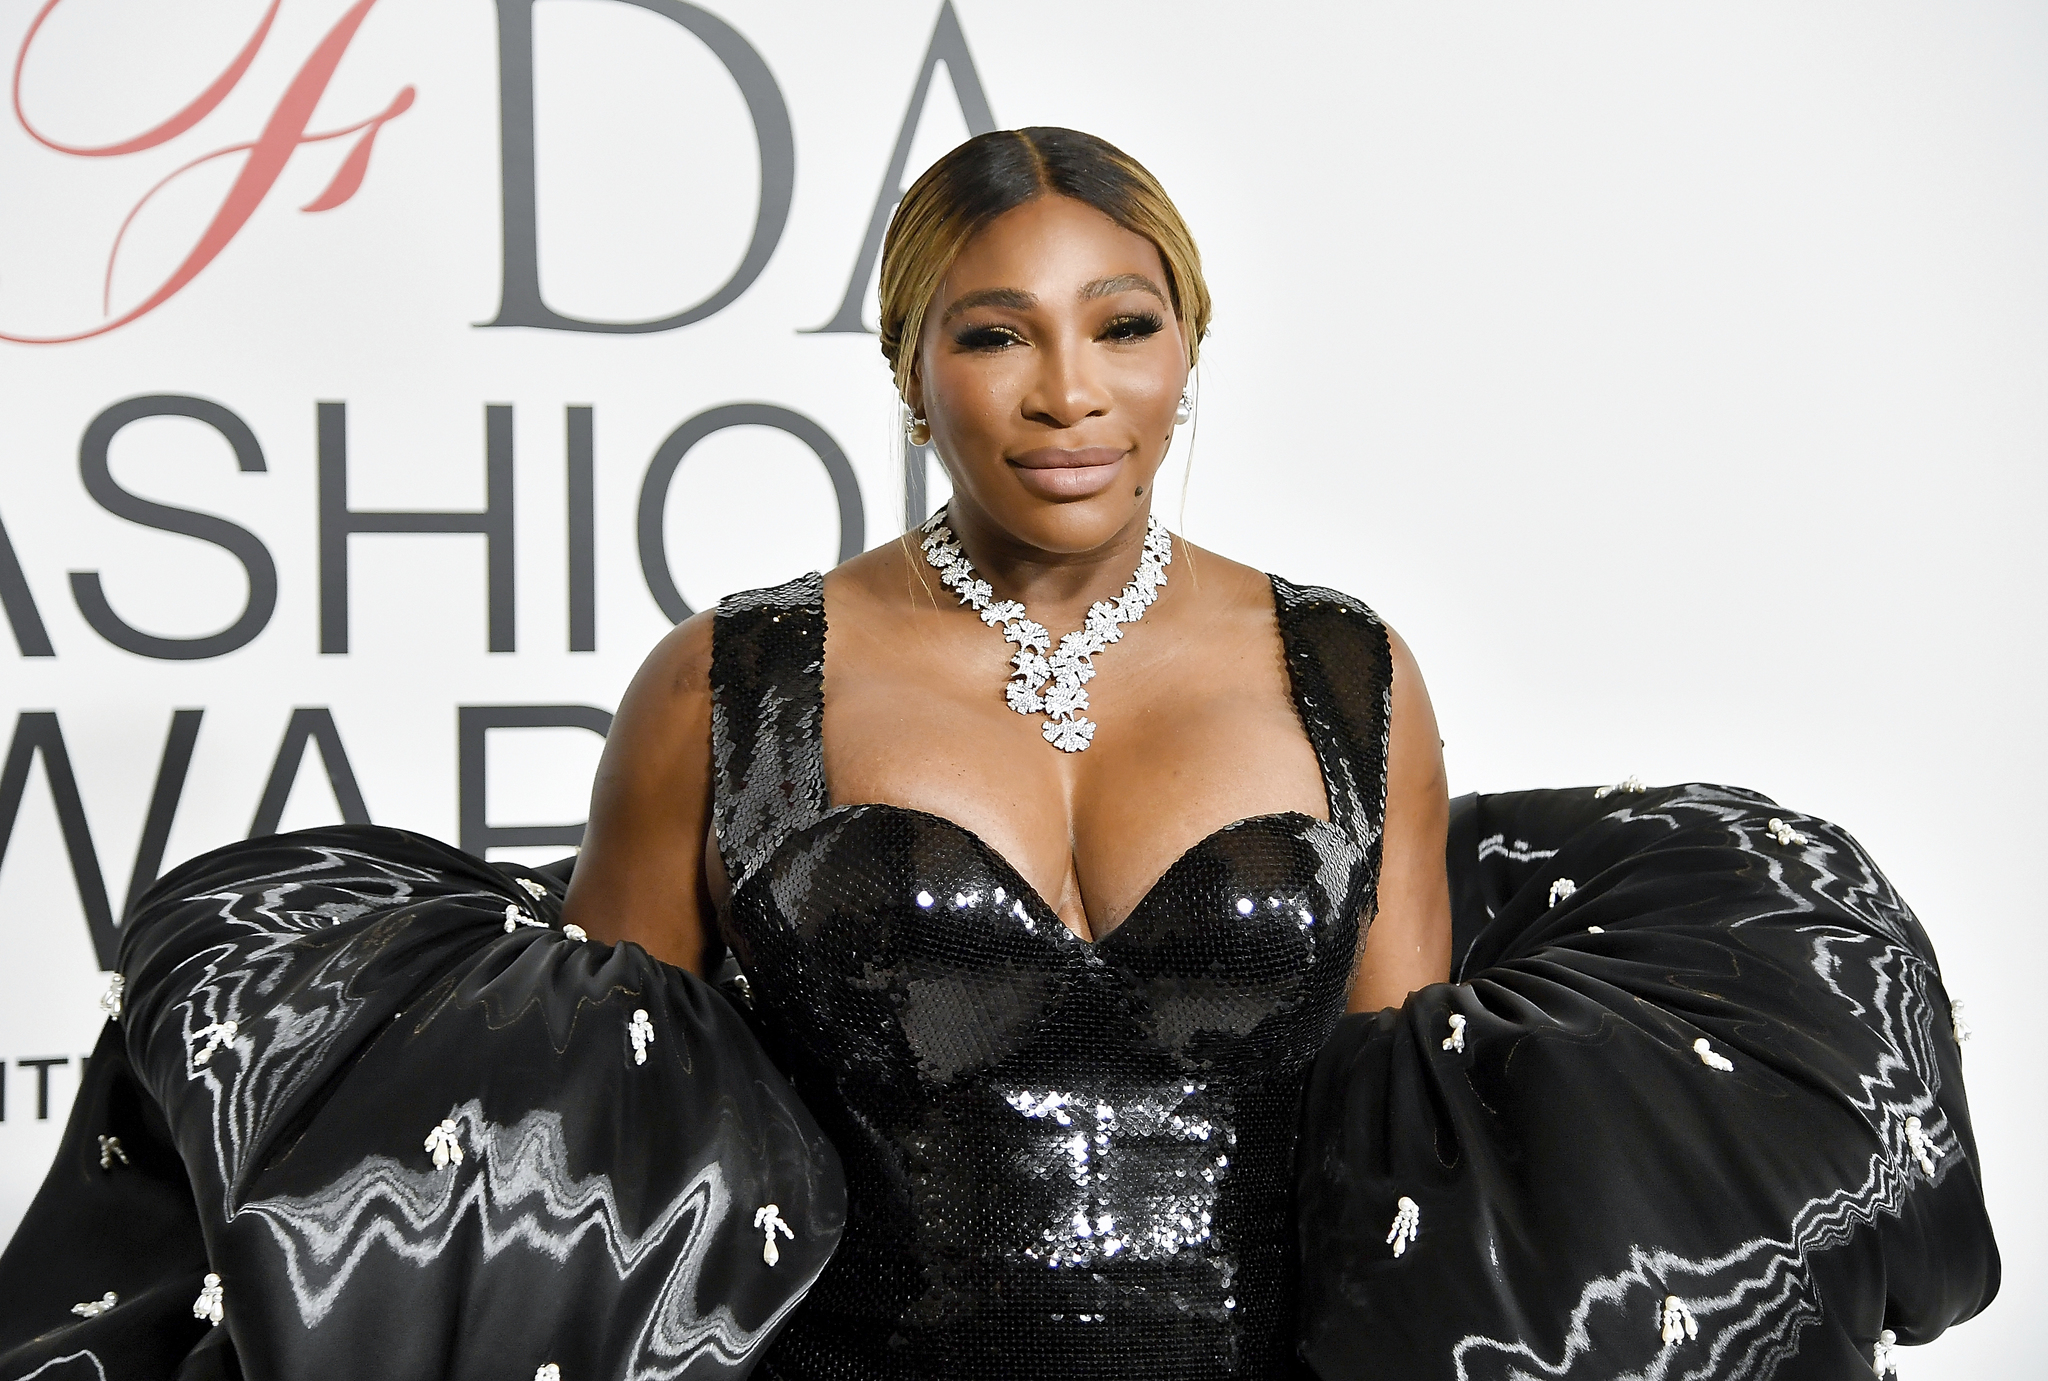 Serena Williams honored as 'fashion icon' at fashion industry's big awards night